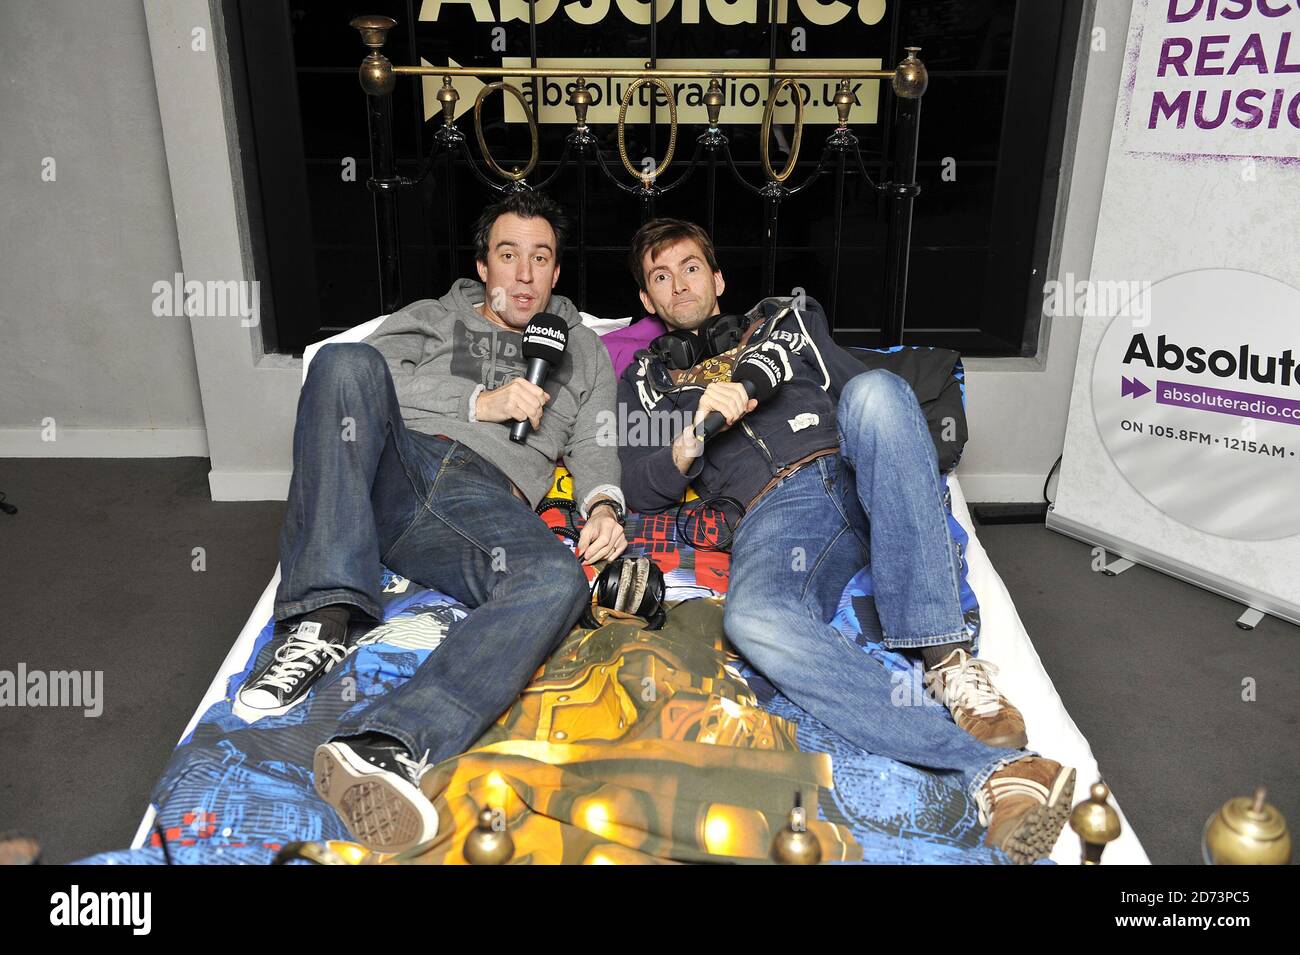 David Tennant and Christian O'Connell broadcast from David Tennant's bed during O'Connell's breakfast show. The bed will be auctioned tomorrow with proceeds going to Children in Need. Stock Photo